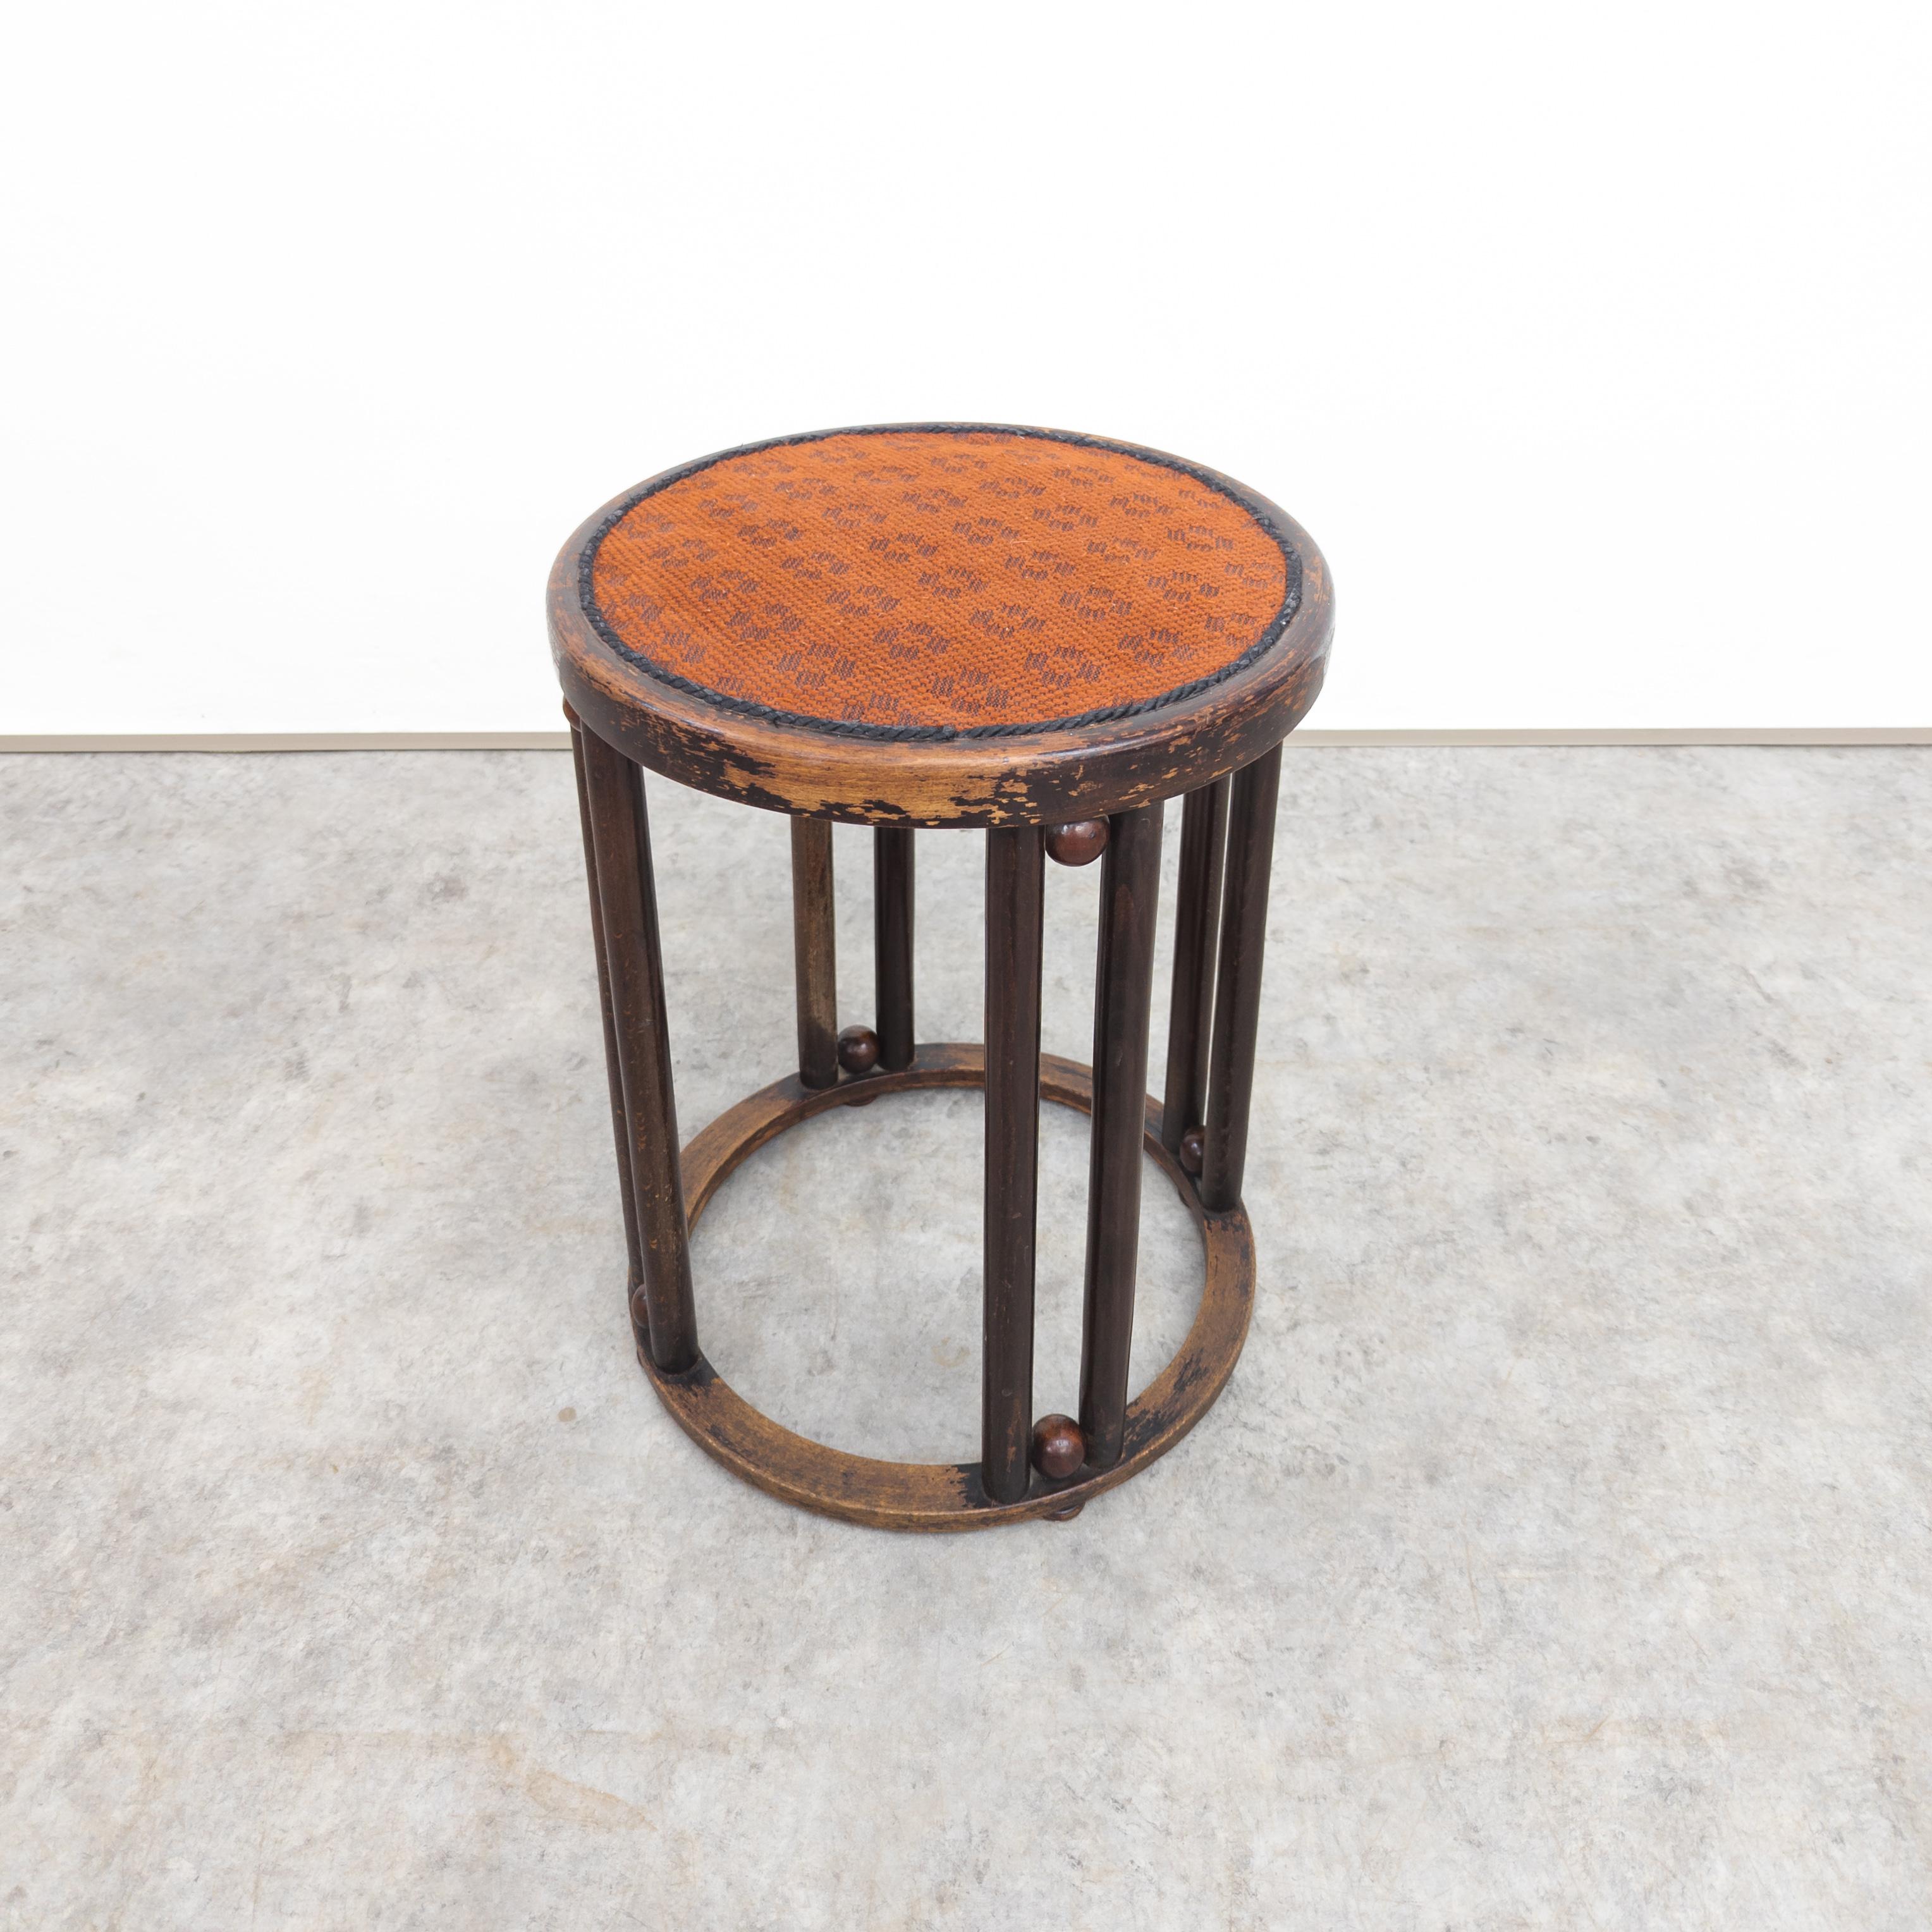 Rare stool from famous set of furniture designed by Josef Hoffmann for Viennese cabaret Fledermaus in 1905. Executed by J&J Kohn, Vienna under catalogue number 728/S. In original condition with traces of wear and age on the wooden parts, fabric